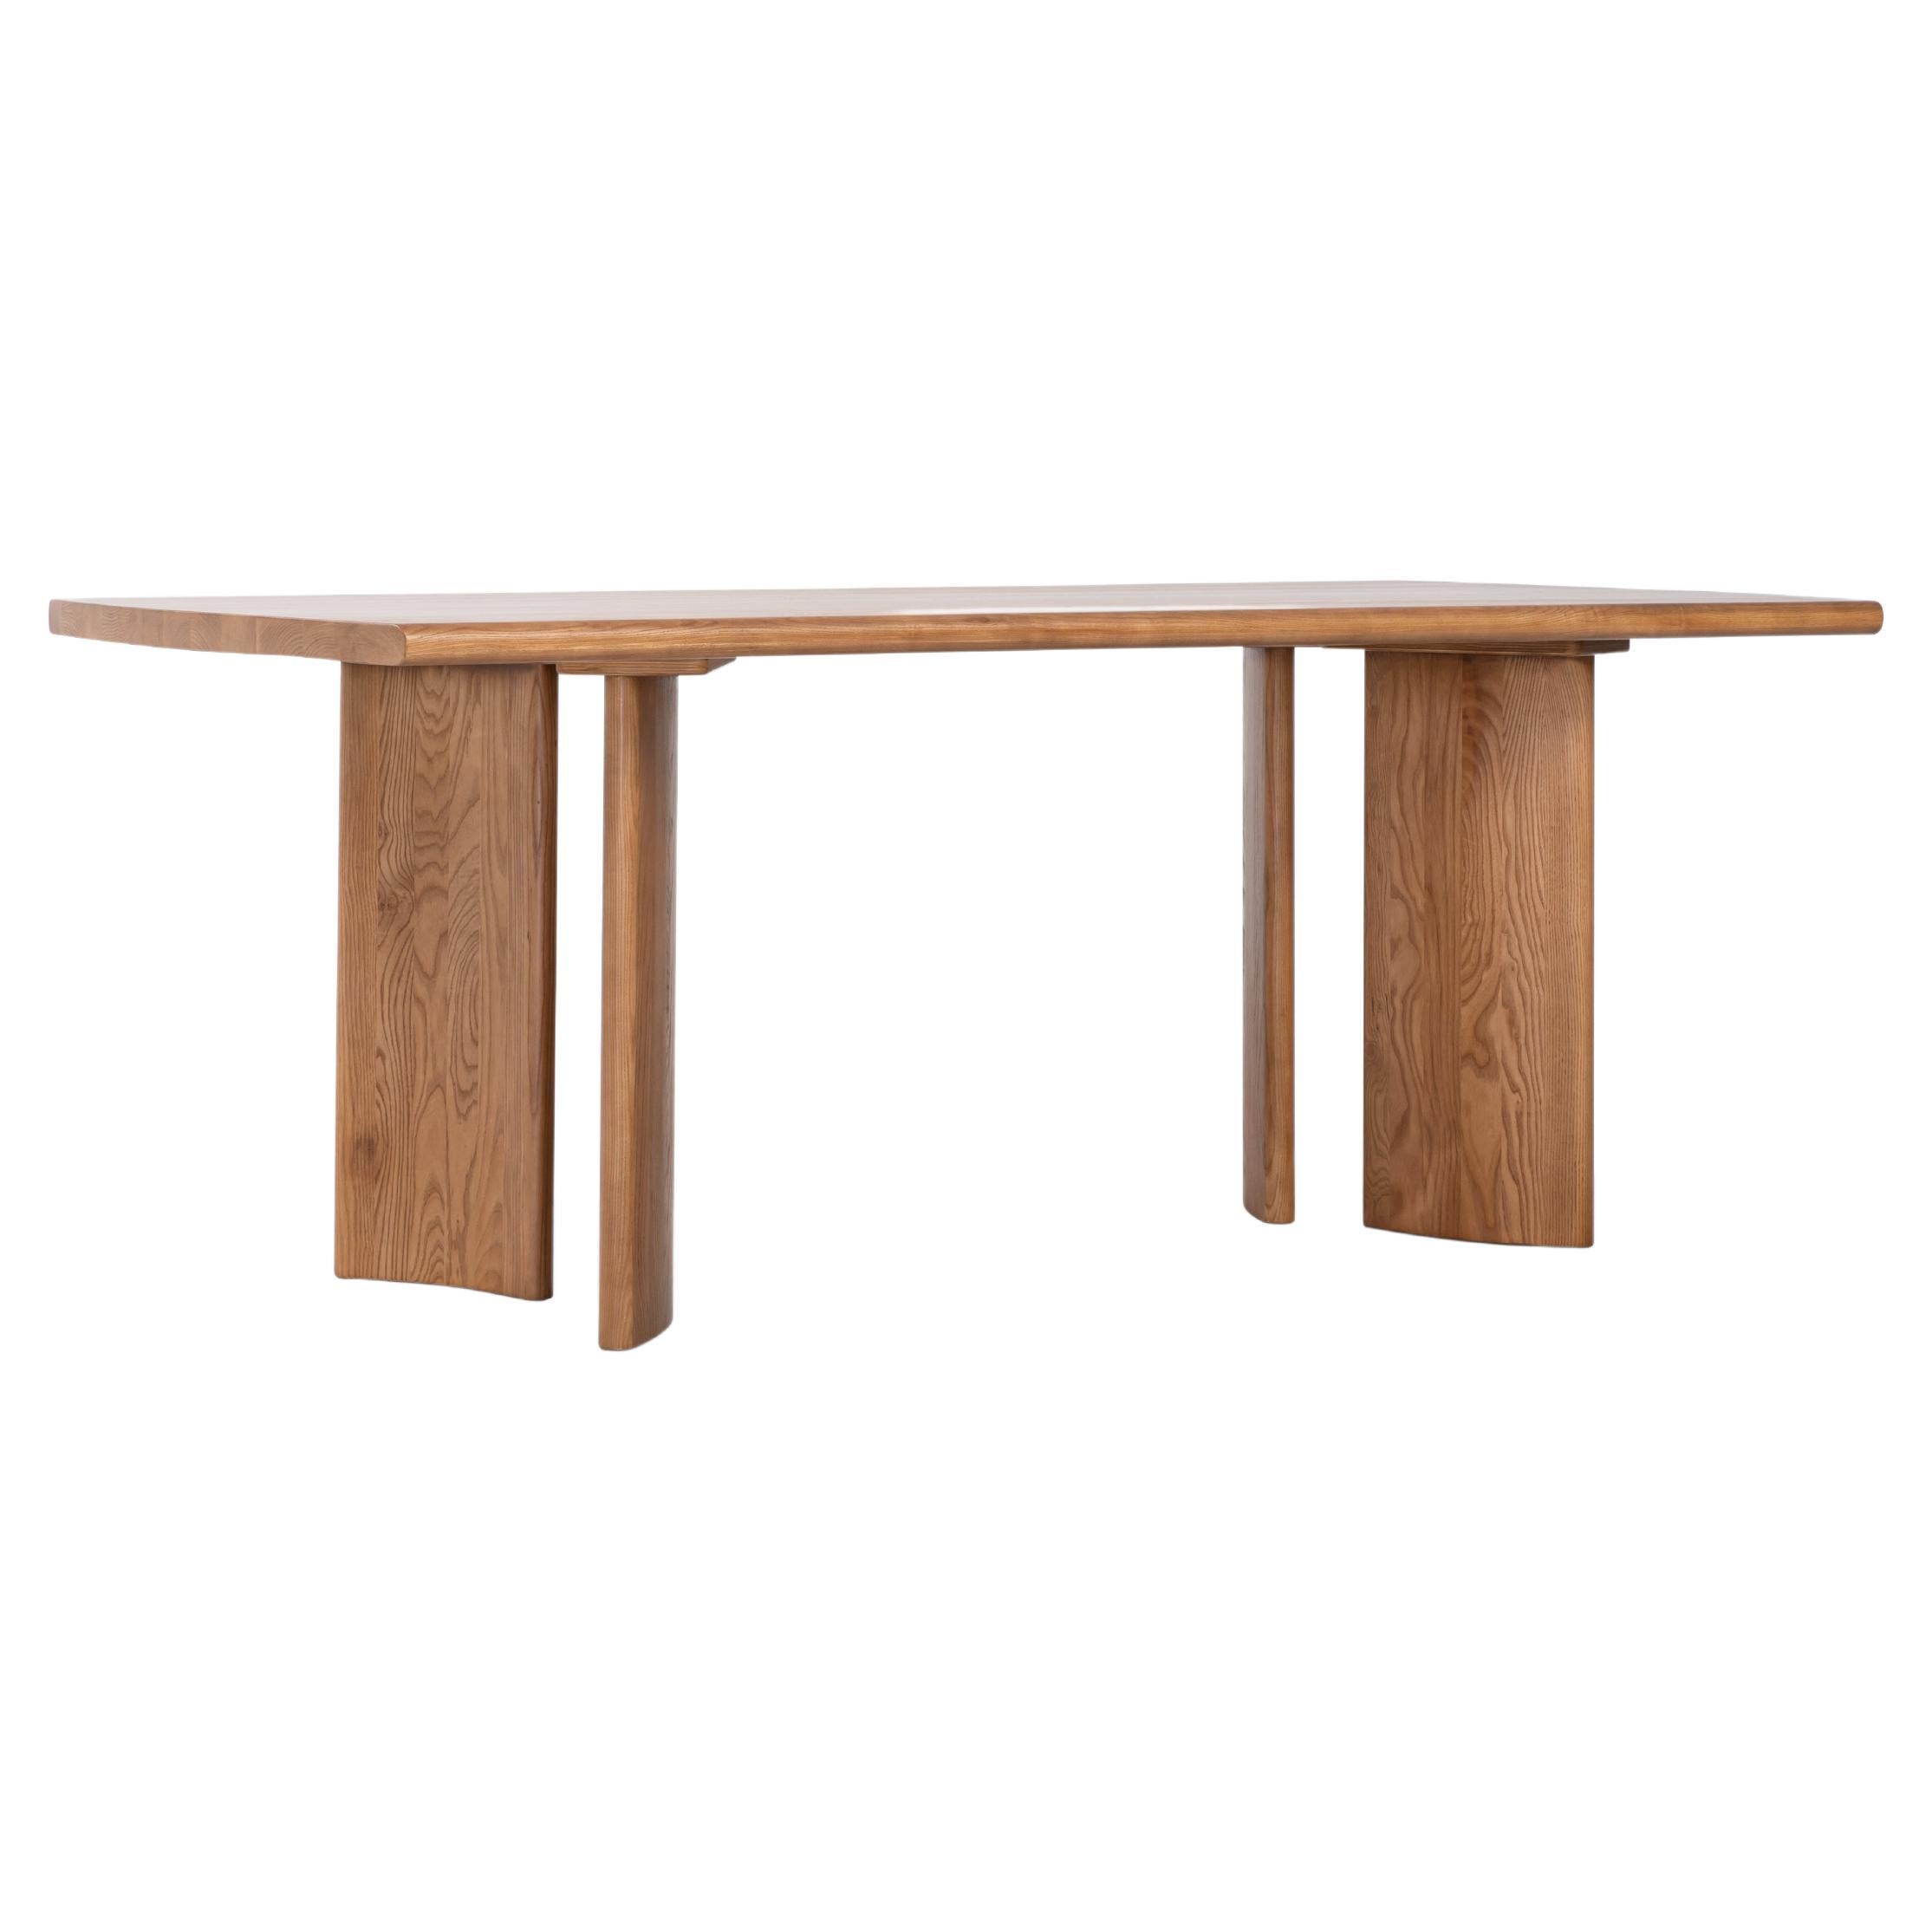 Crest Table 78" by Sun at Six, Sienna, Minimalist Dining Table in Wood